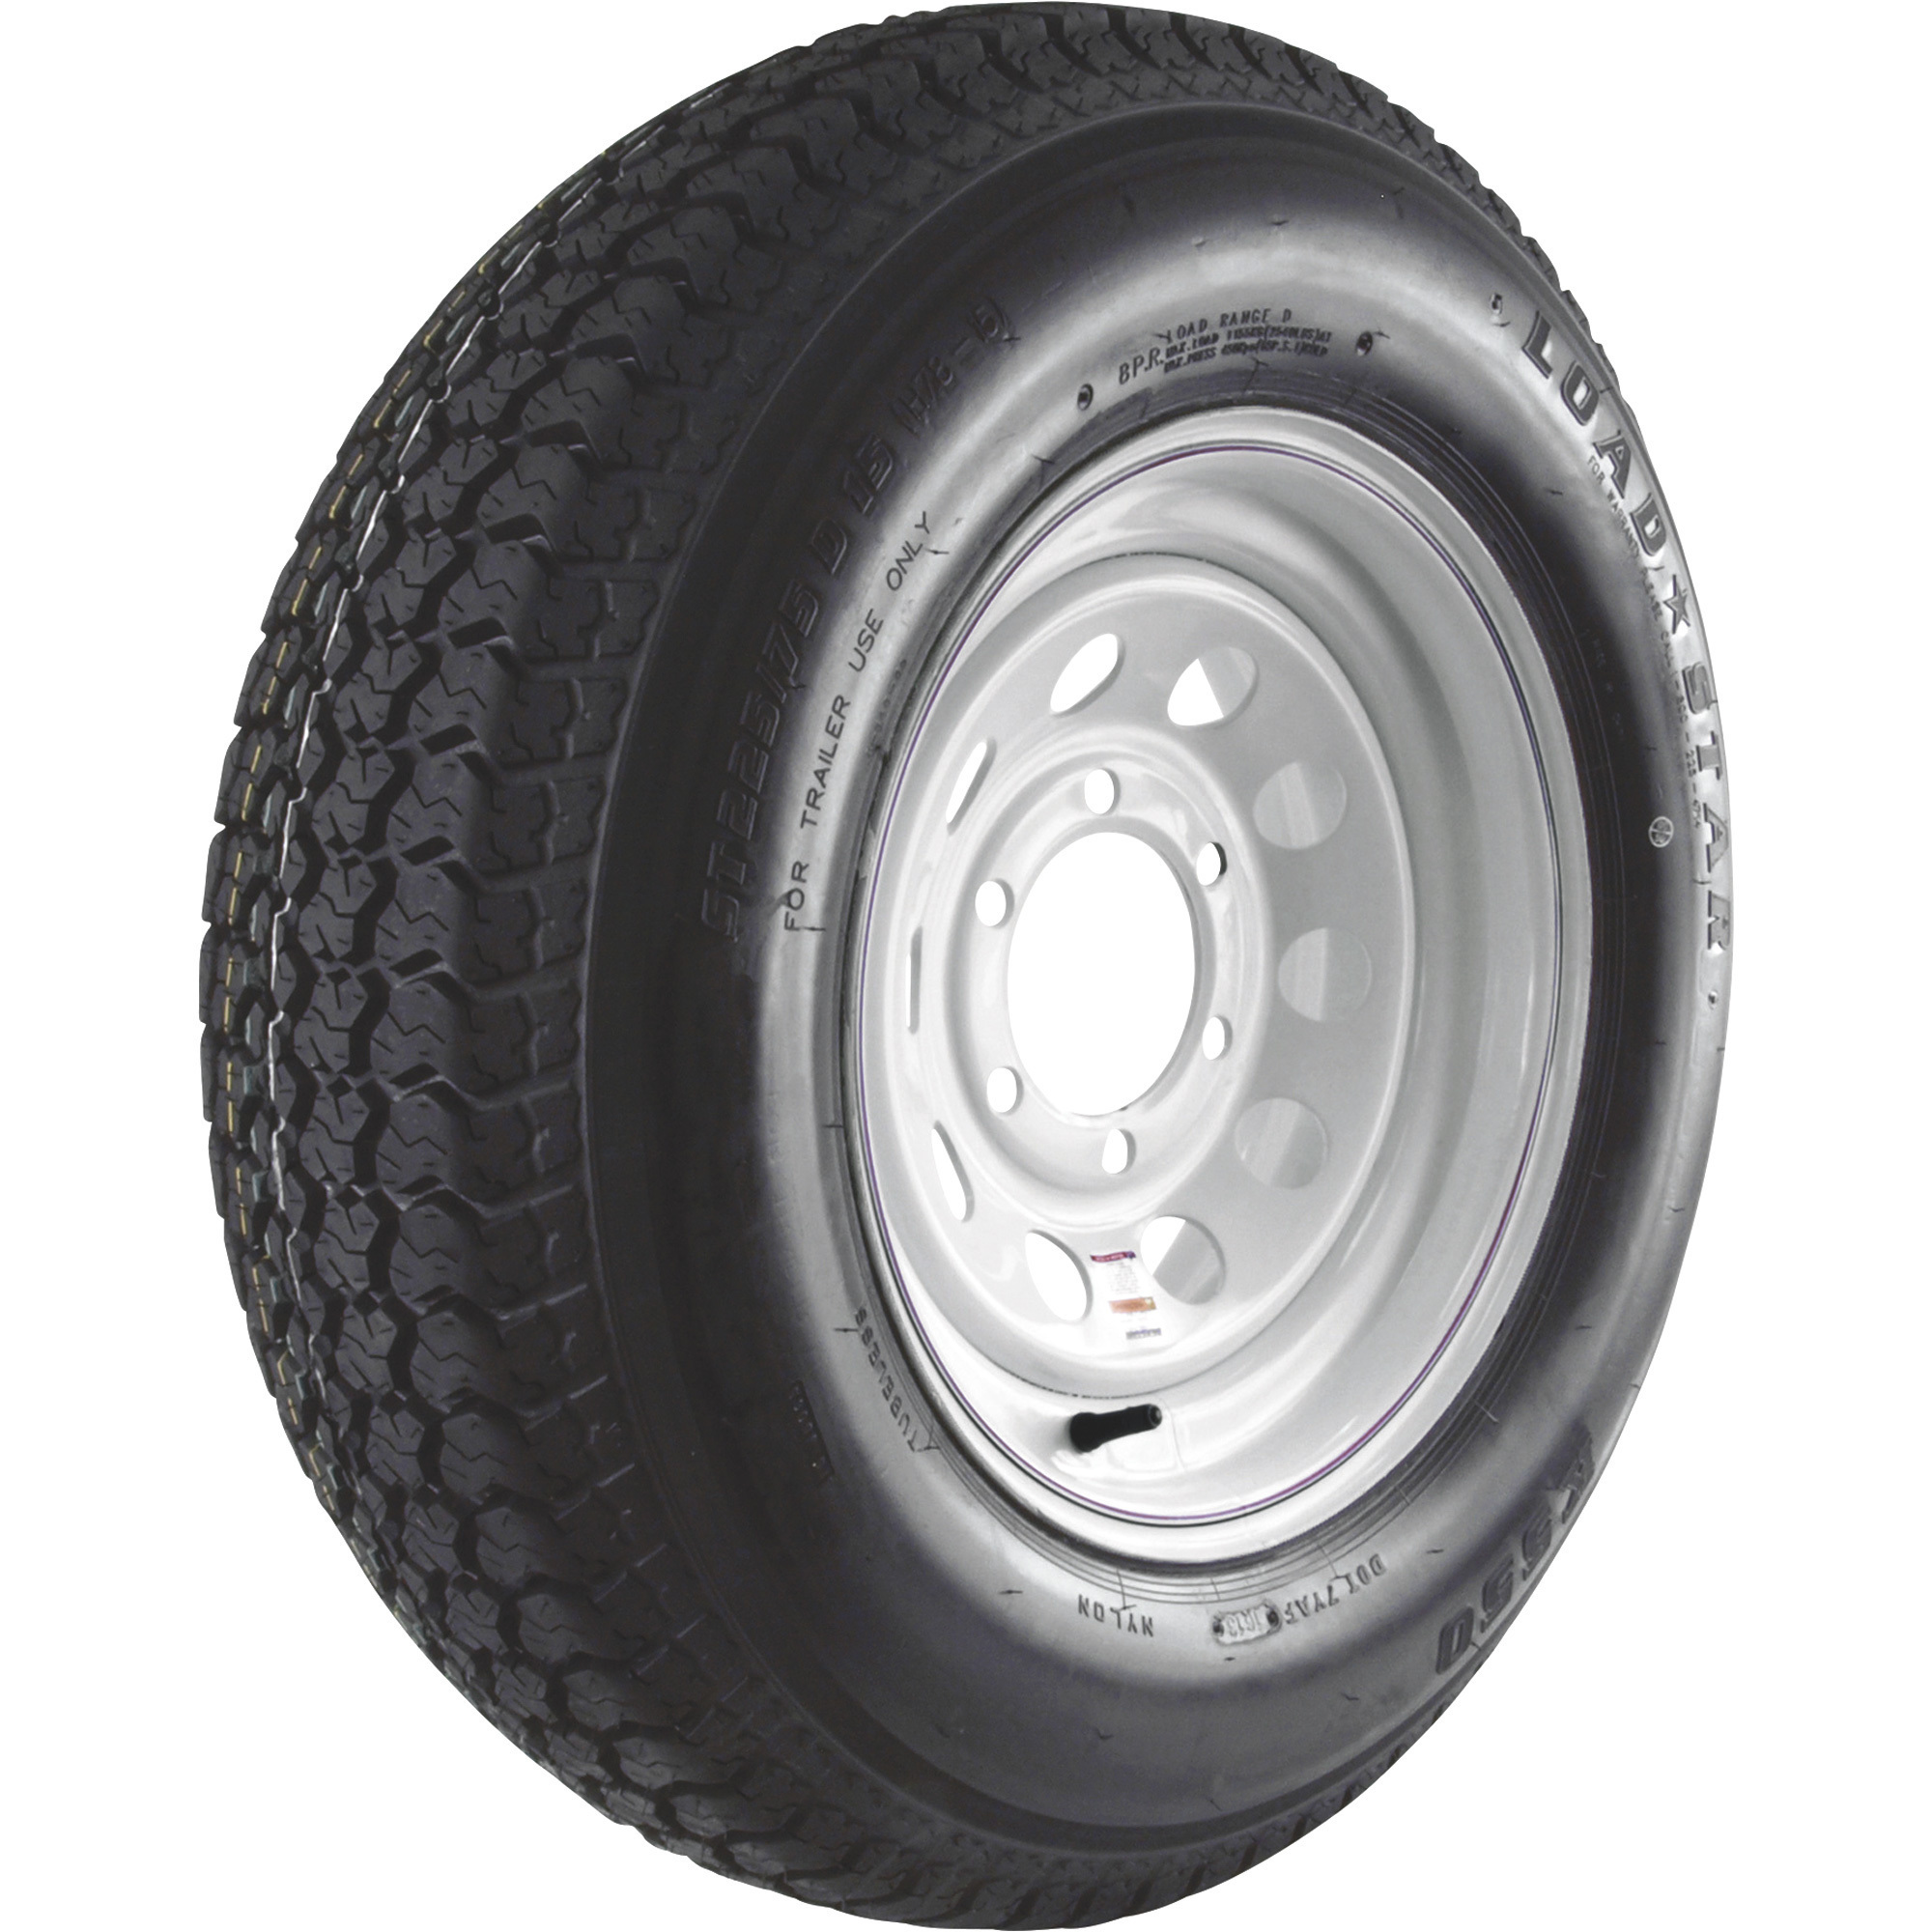 Martin Wheel Carrier Star 15Inch Bias-Ply Trailer Tire and Wheel Assembly â ST225/75D-15, 6-Hole, Load Range D, Model DM225D5D-6MI